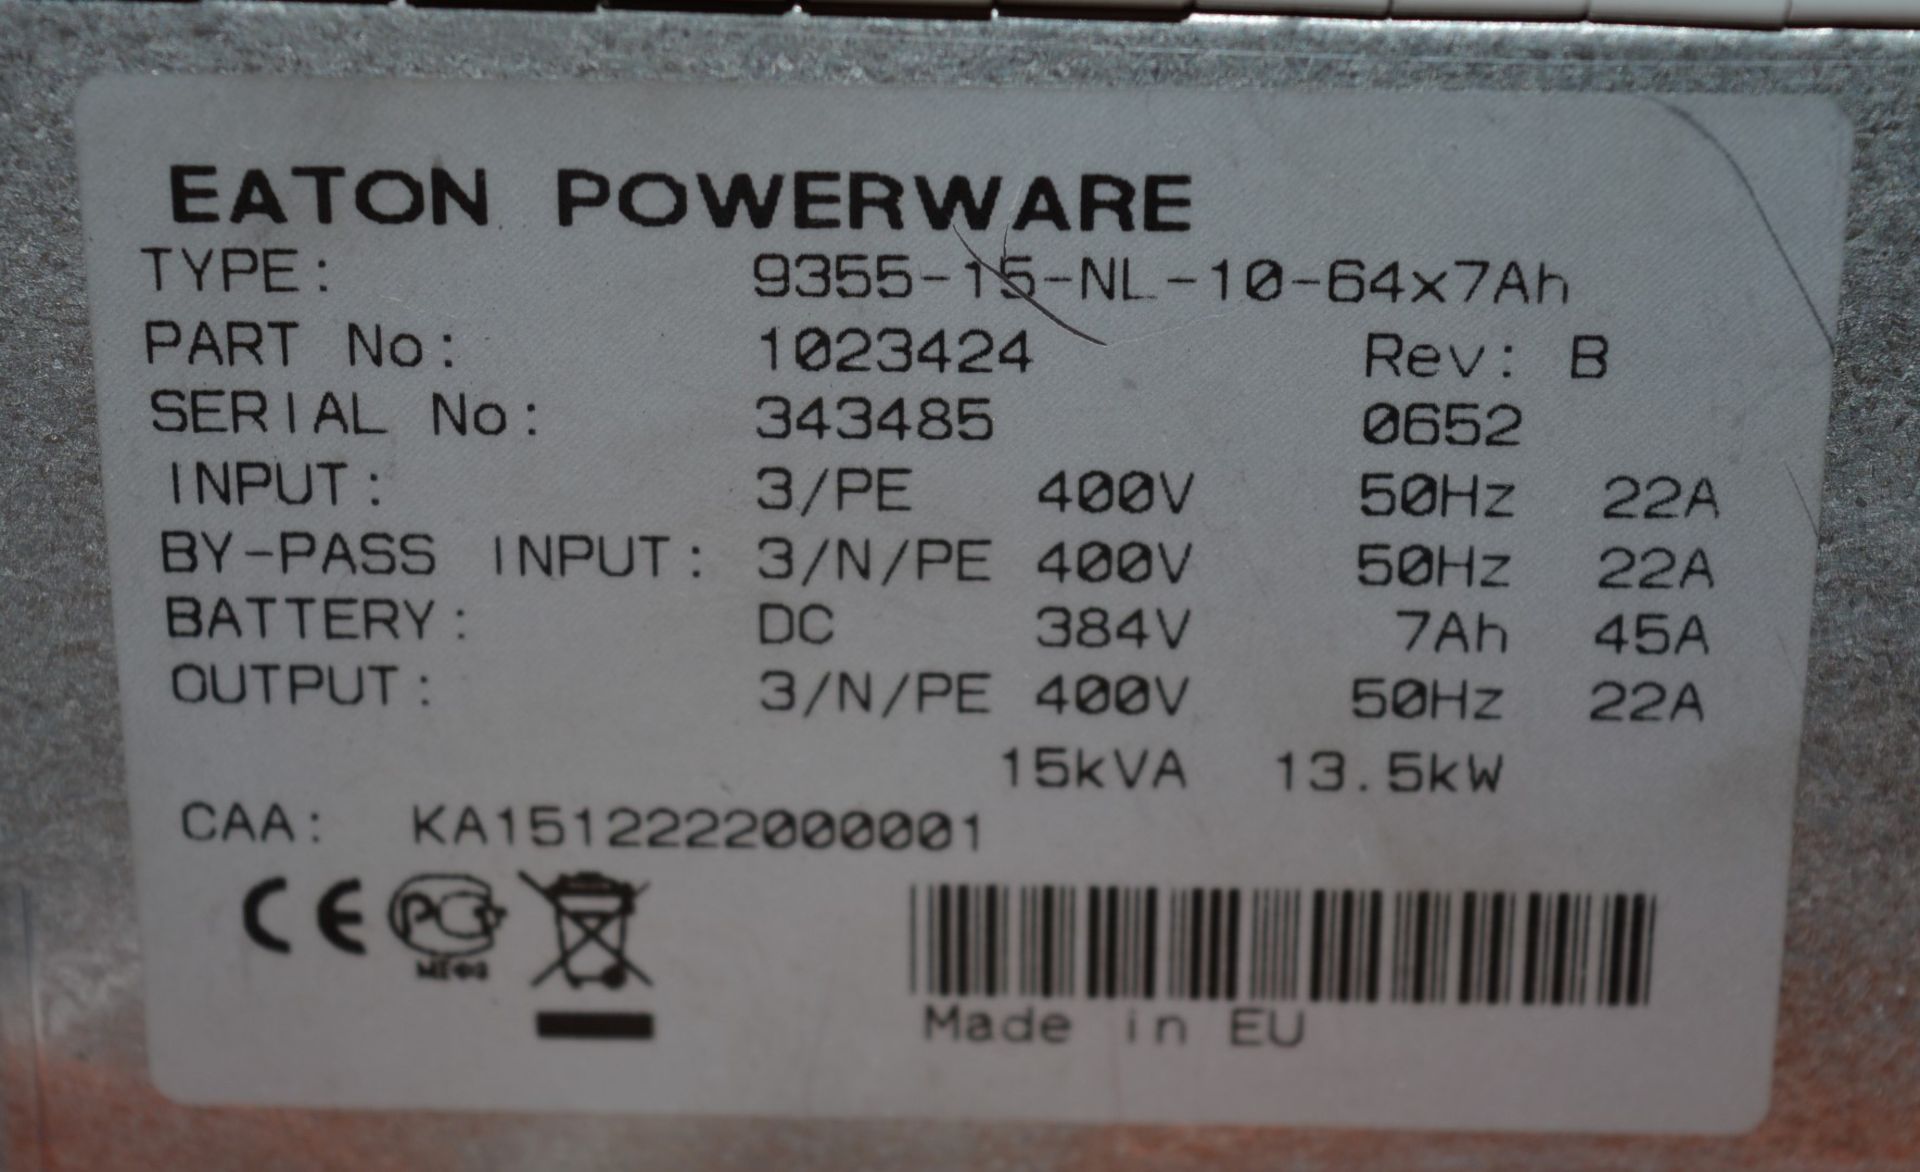 1 x Eaton Powerware 9355 3 Phase 15kVA UPS - 64x7Ah Batteries - CL400 - Part Number 1023424 - Ref - Image 6 of 6